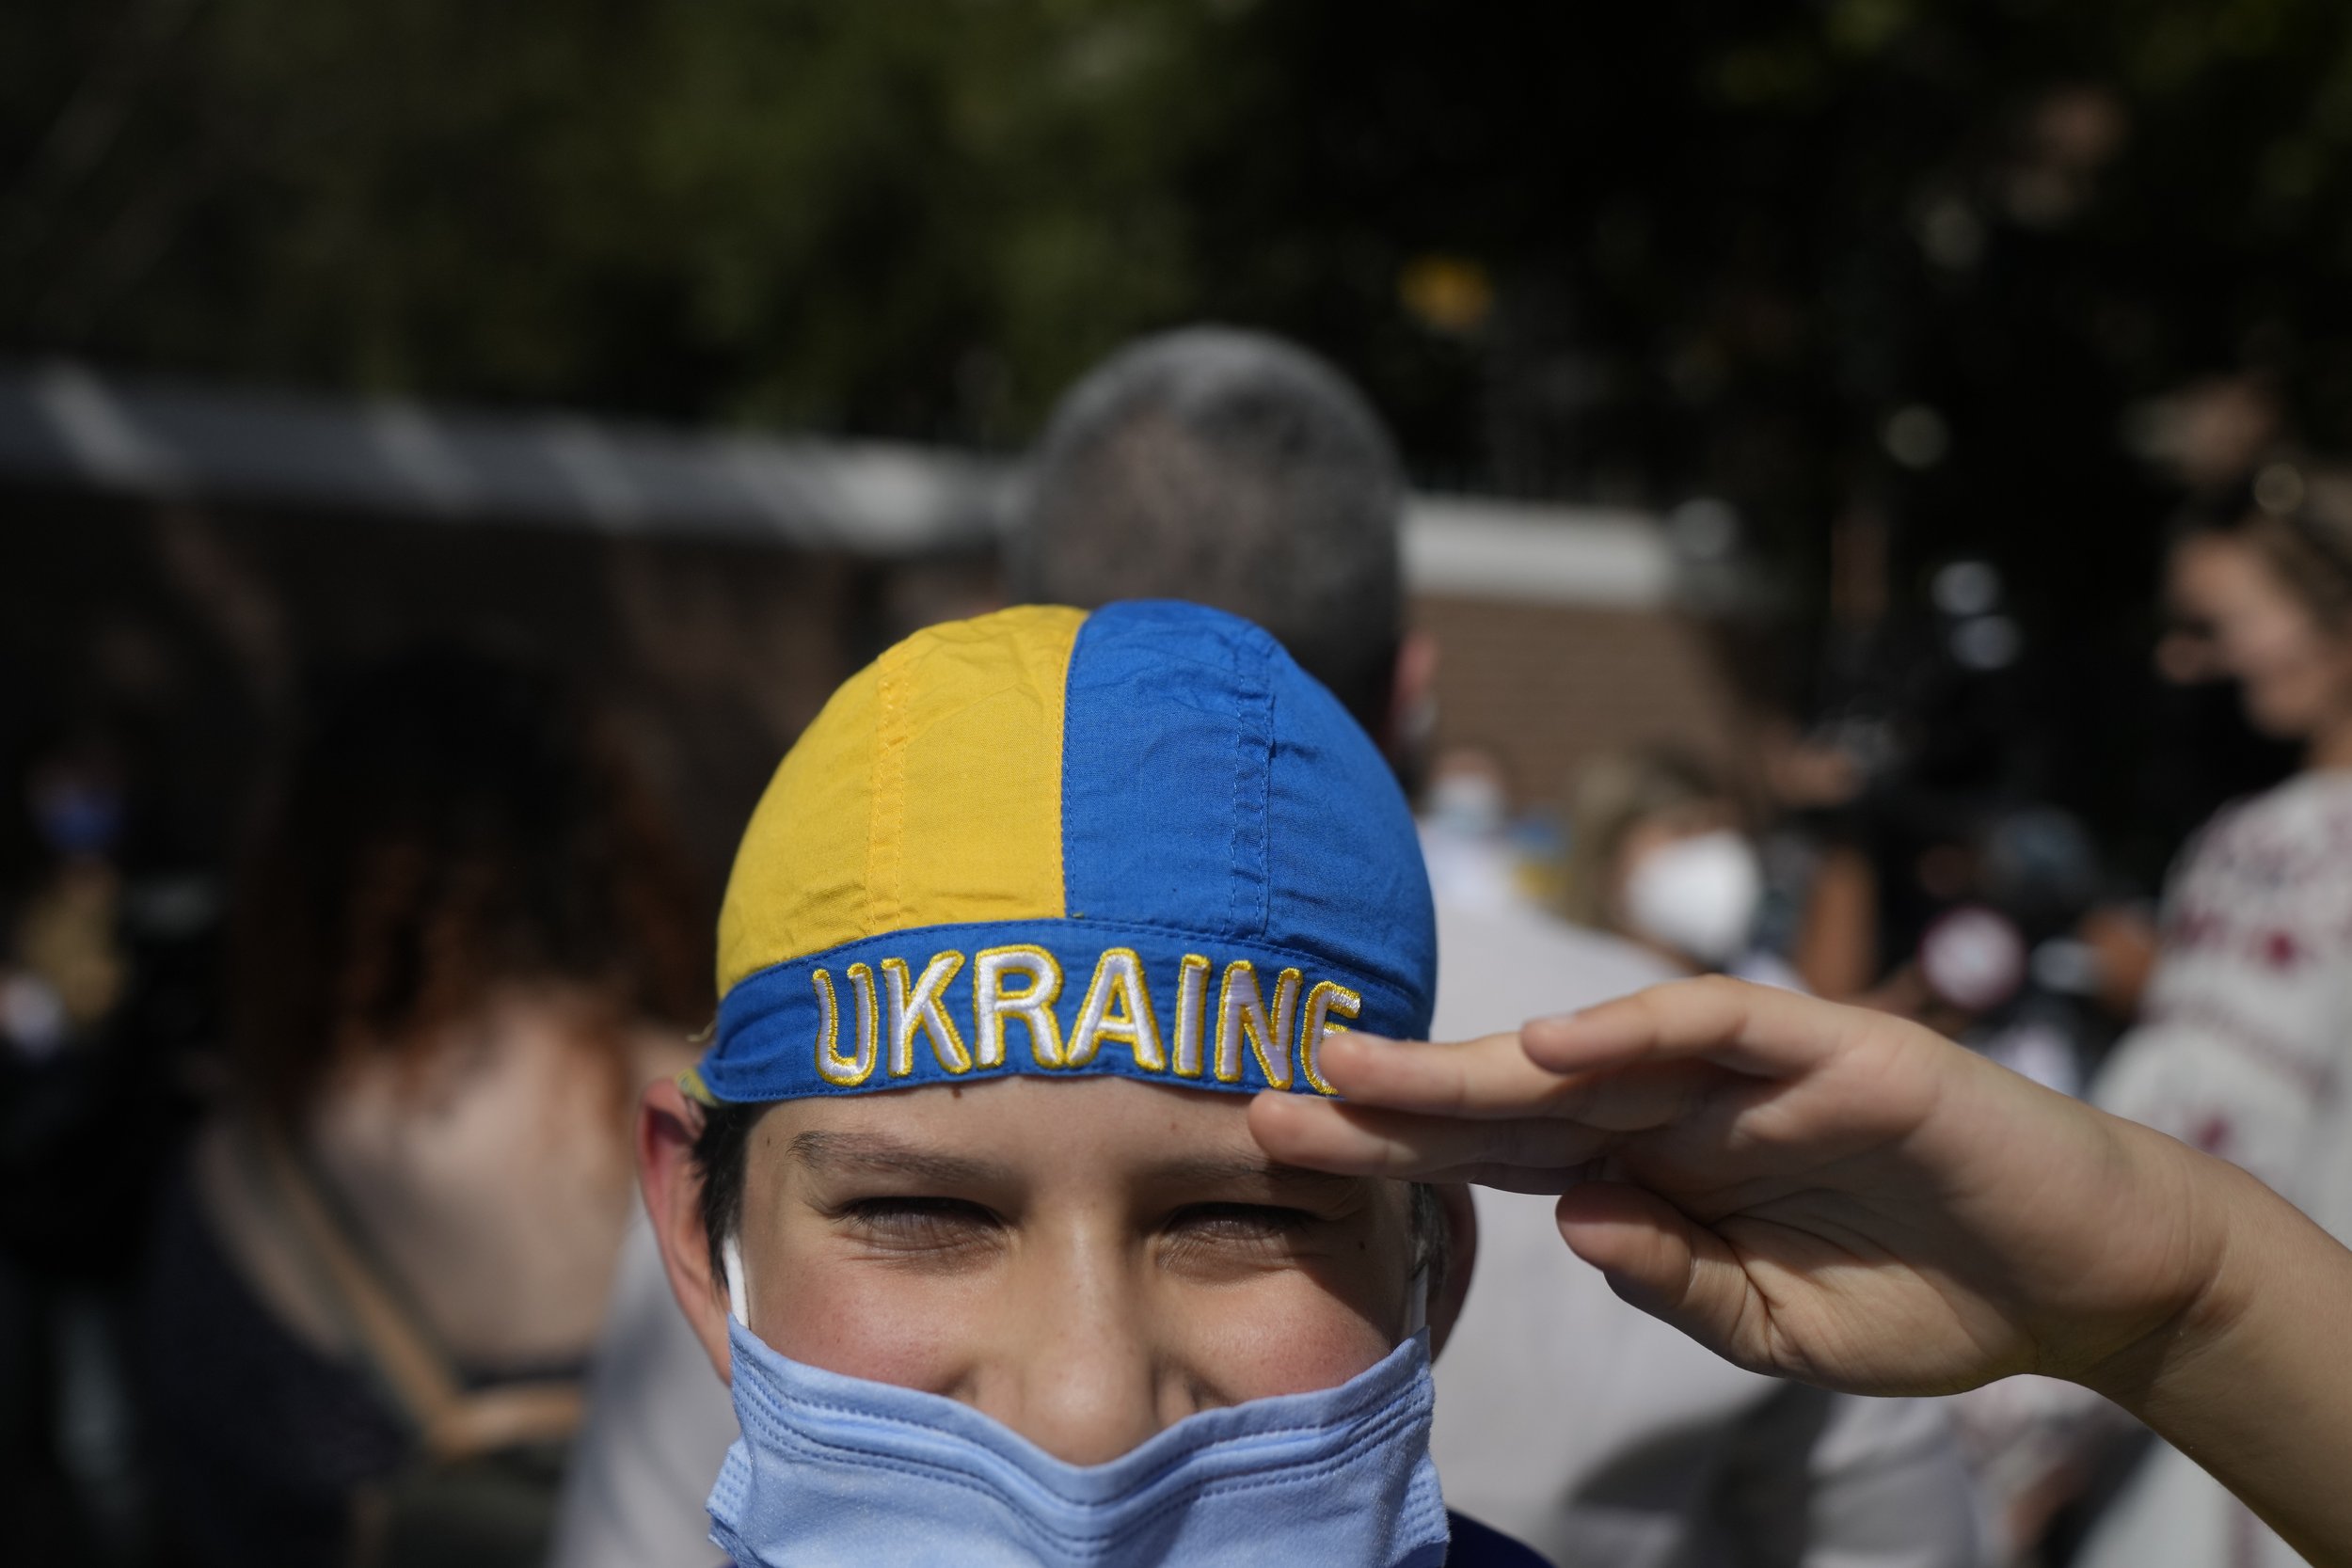  Andres Monizaga, 12, salutes during a protest against Russia's invasion of Ukraine outside the Russian embassy in Santiago, Chile, Thursday, Feb. 24, 2022. Monizaga, whose grandparents live in Ukraine, said he spent last summer with them playing che